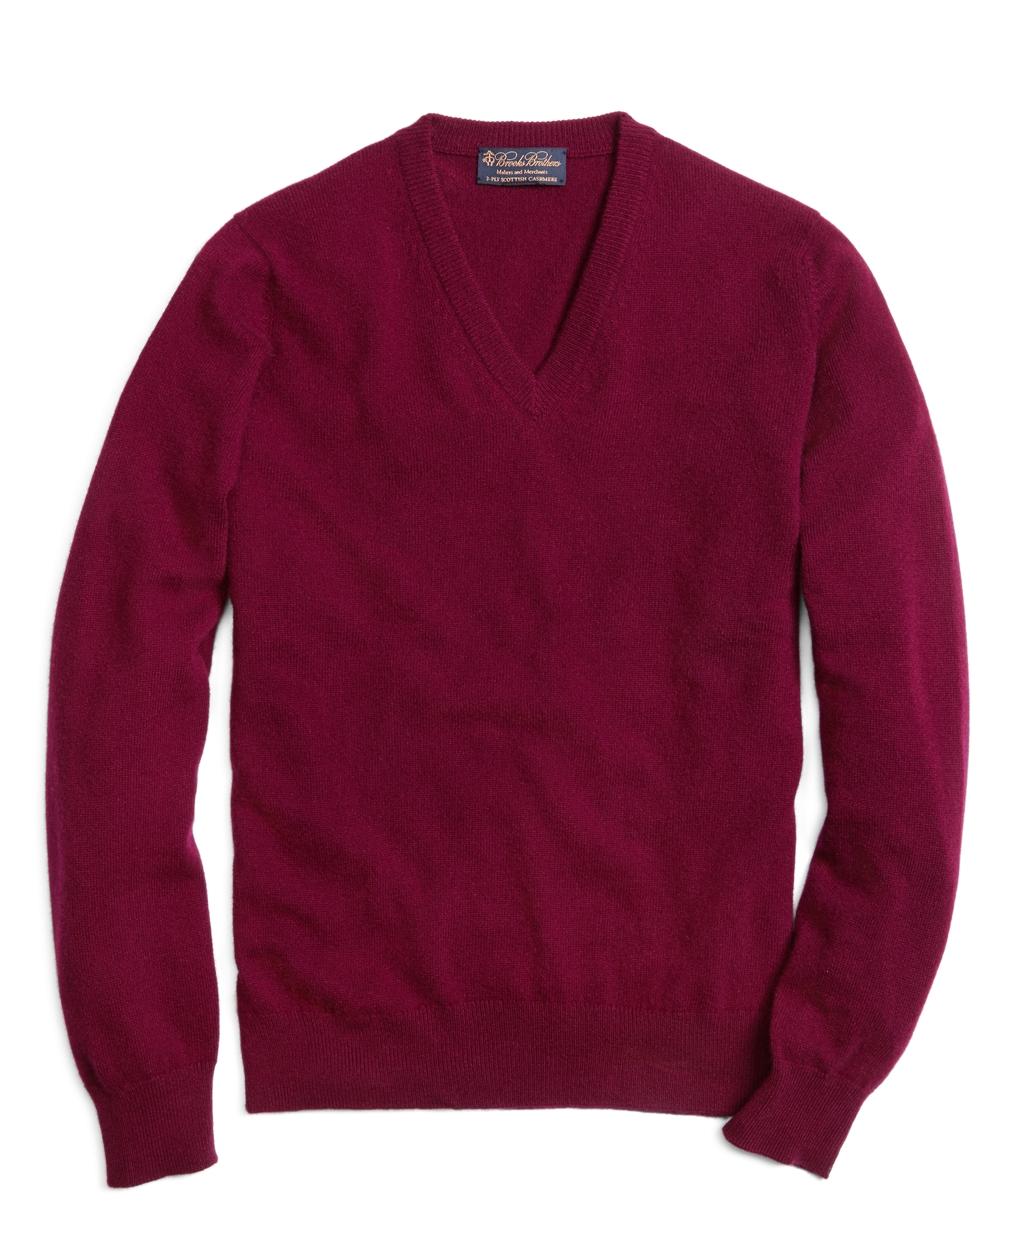 Brooks Brothers Cashmere V-neck Sweater in Purple for Men - Lyst